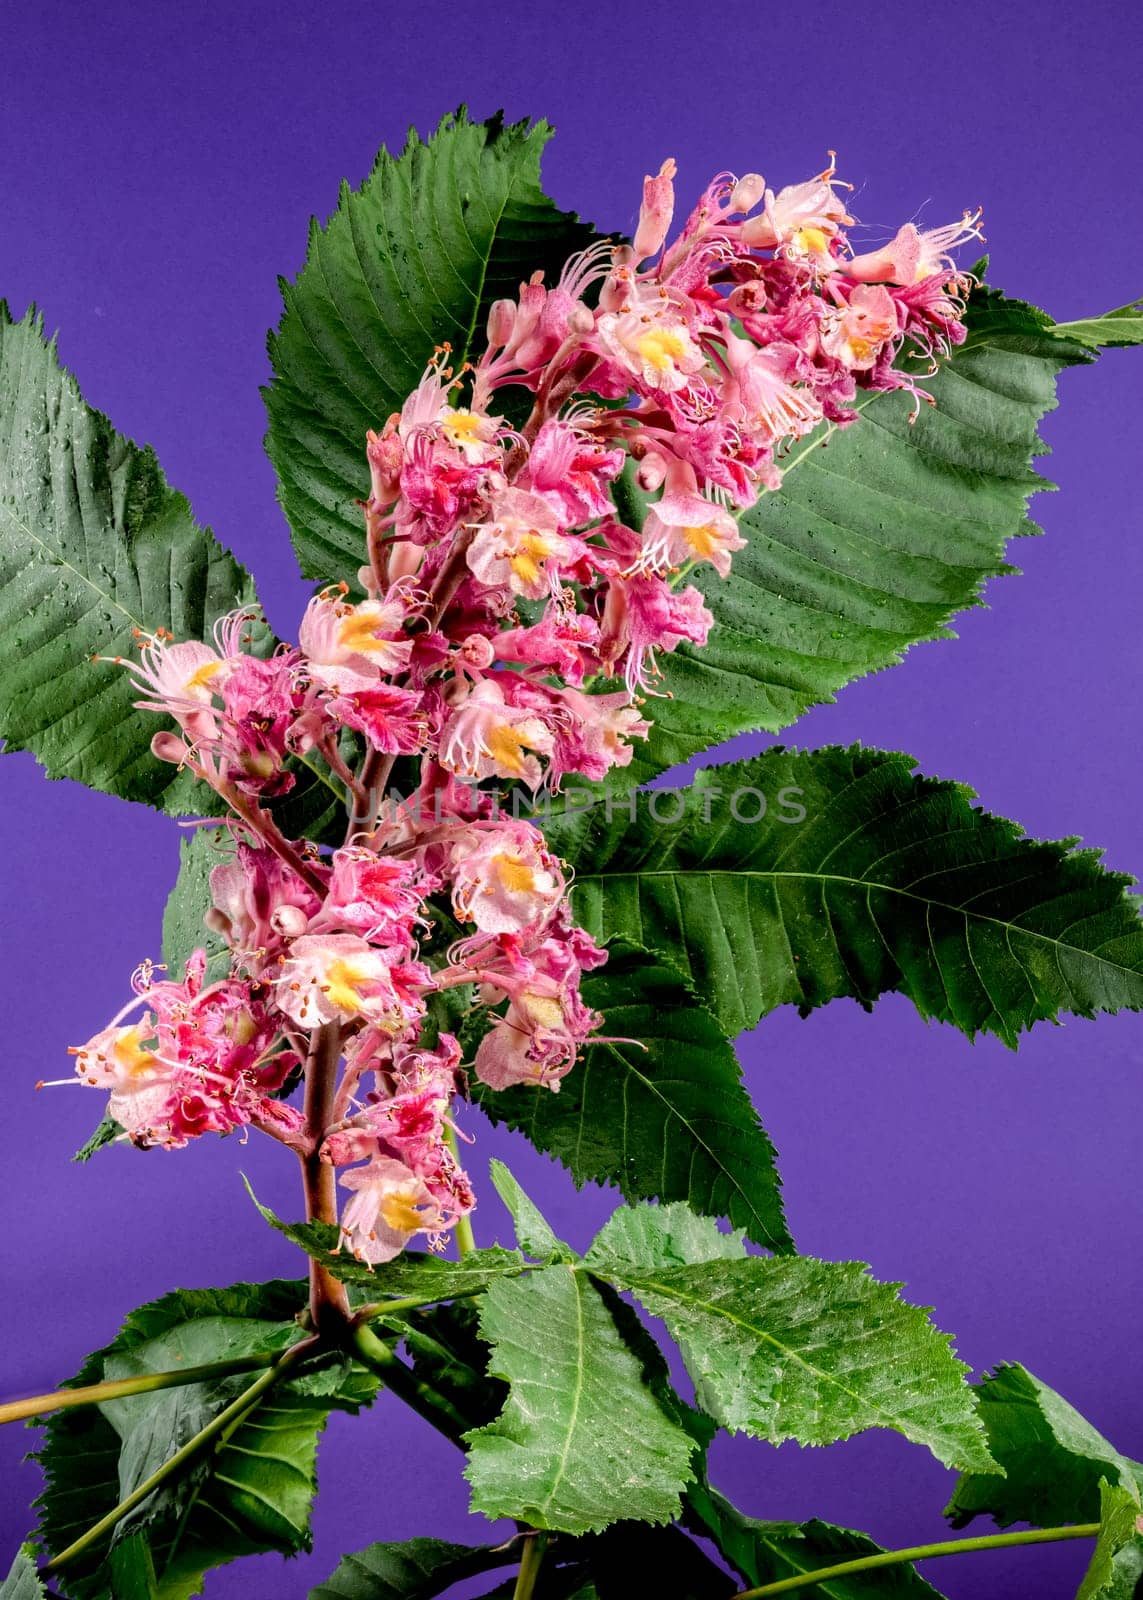 Blooming red horse-chestnut flowers on a purple background by Multipedia